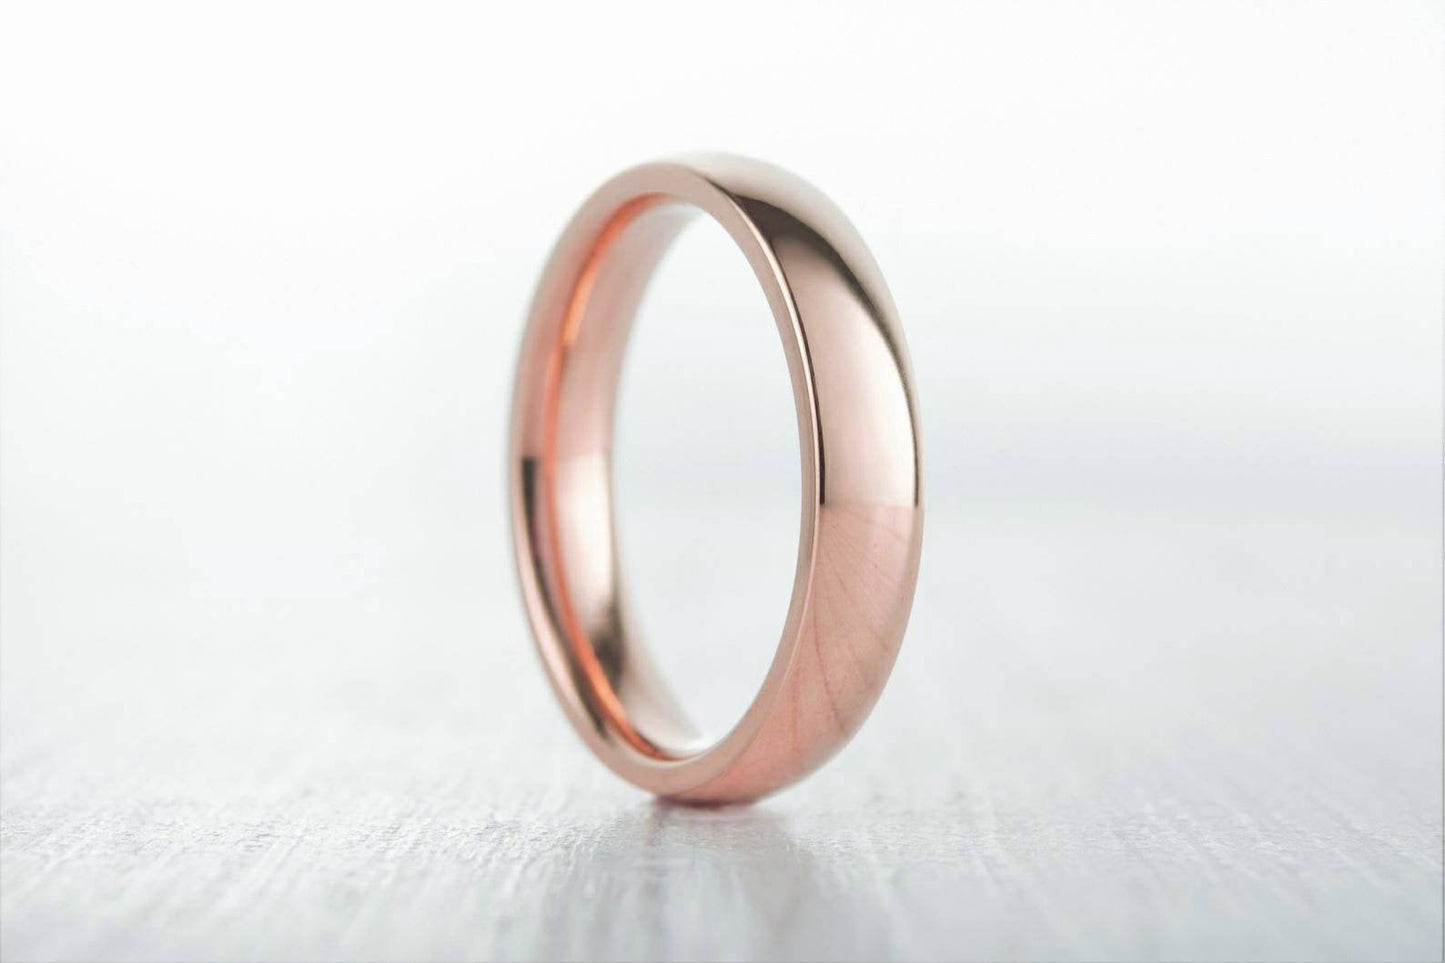 5mm Wide, filled 18ct rose gold Plain Wedding band Ring - gold ring